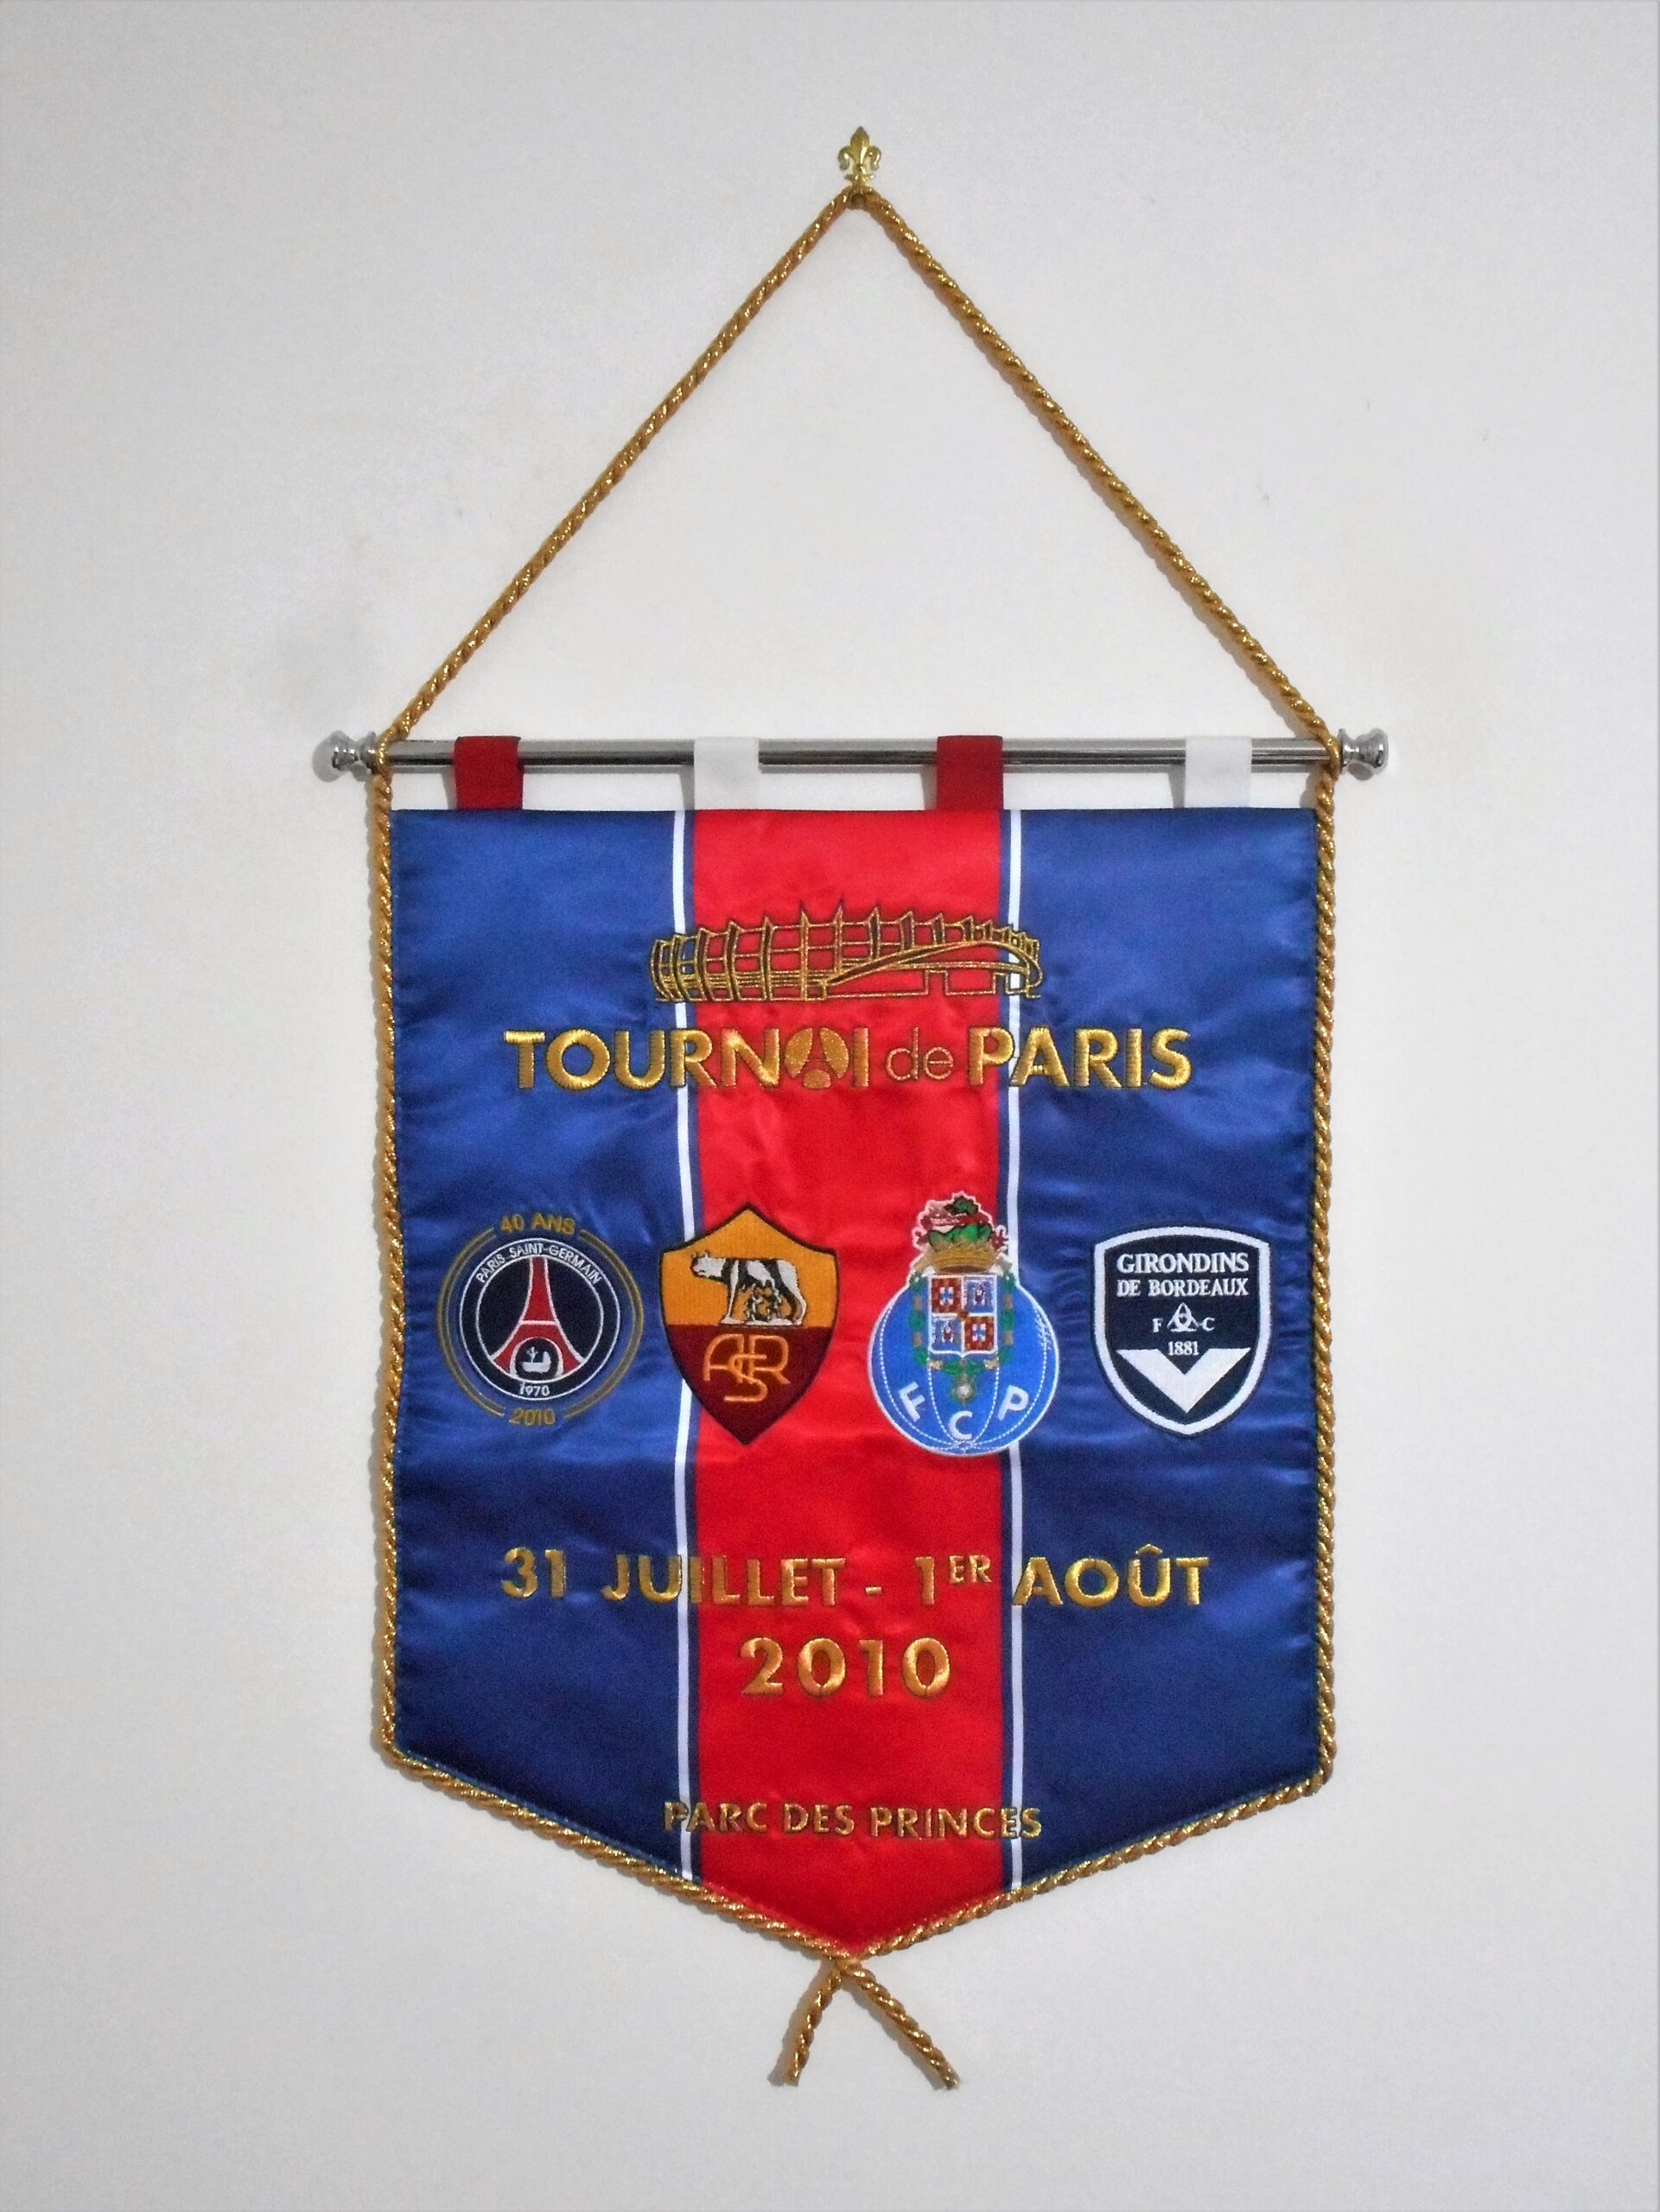 Embroidered pennant issued in occasion of the Paris tournament played in 2010